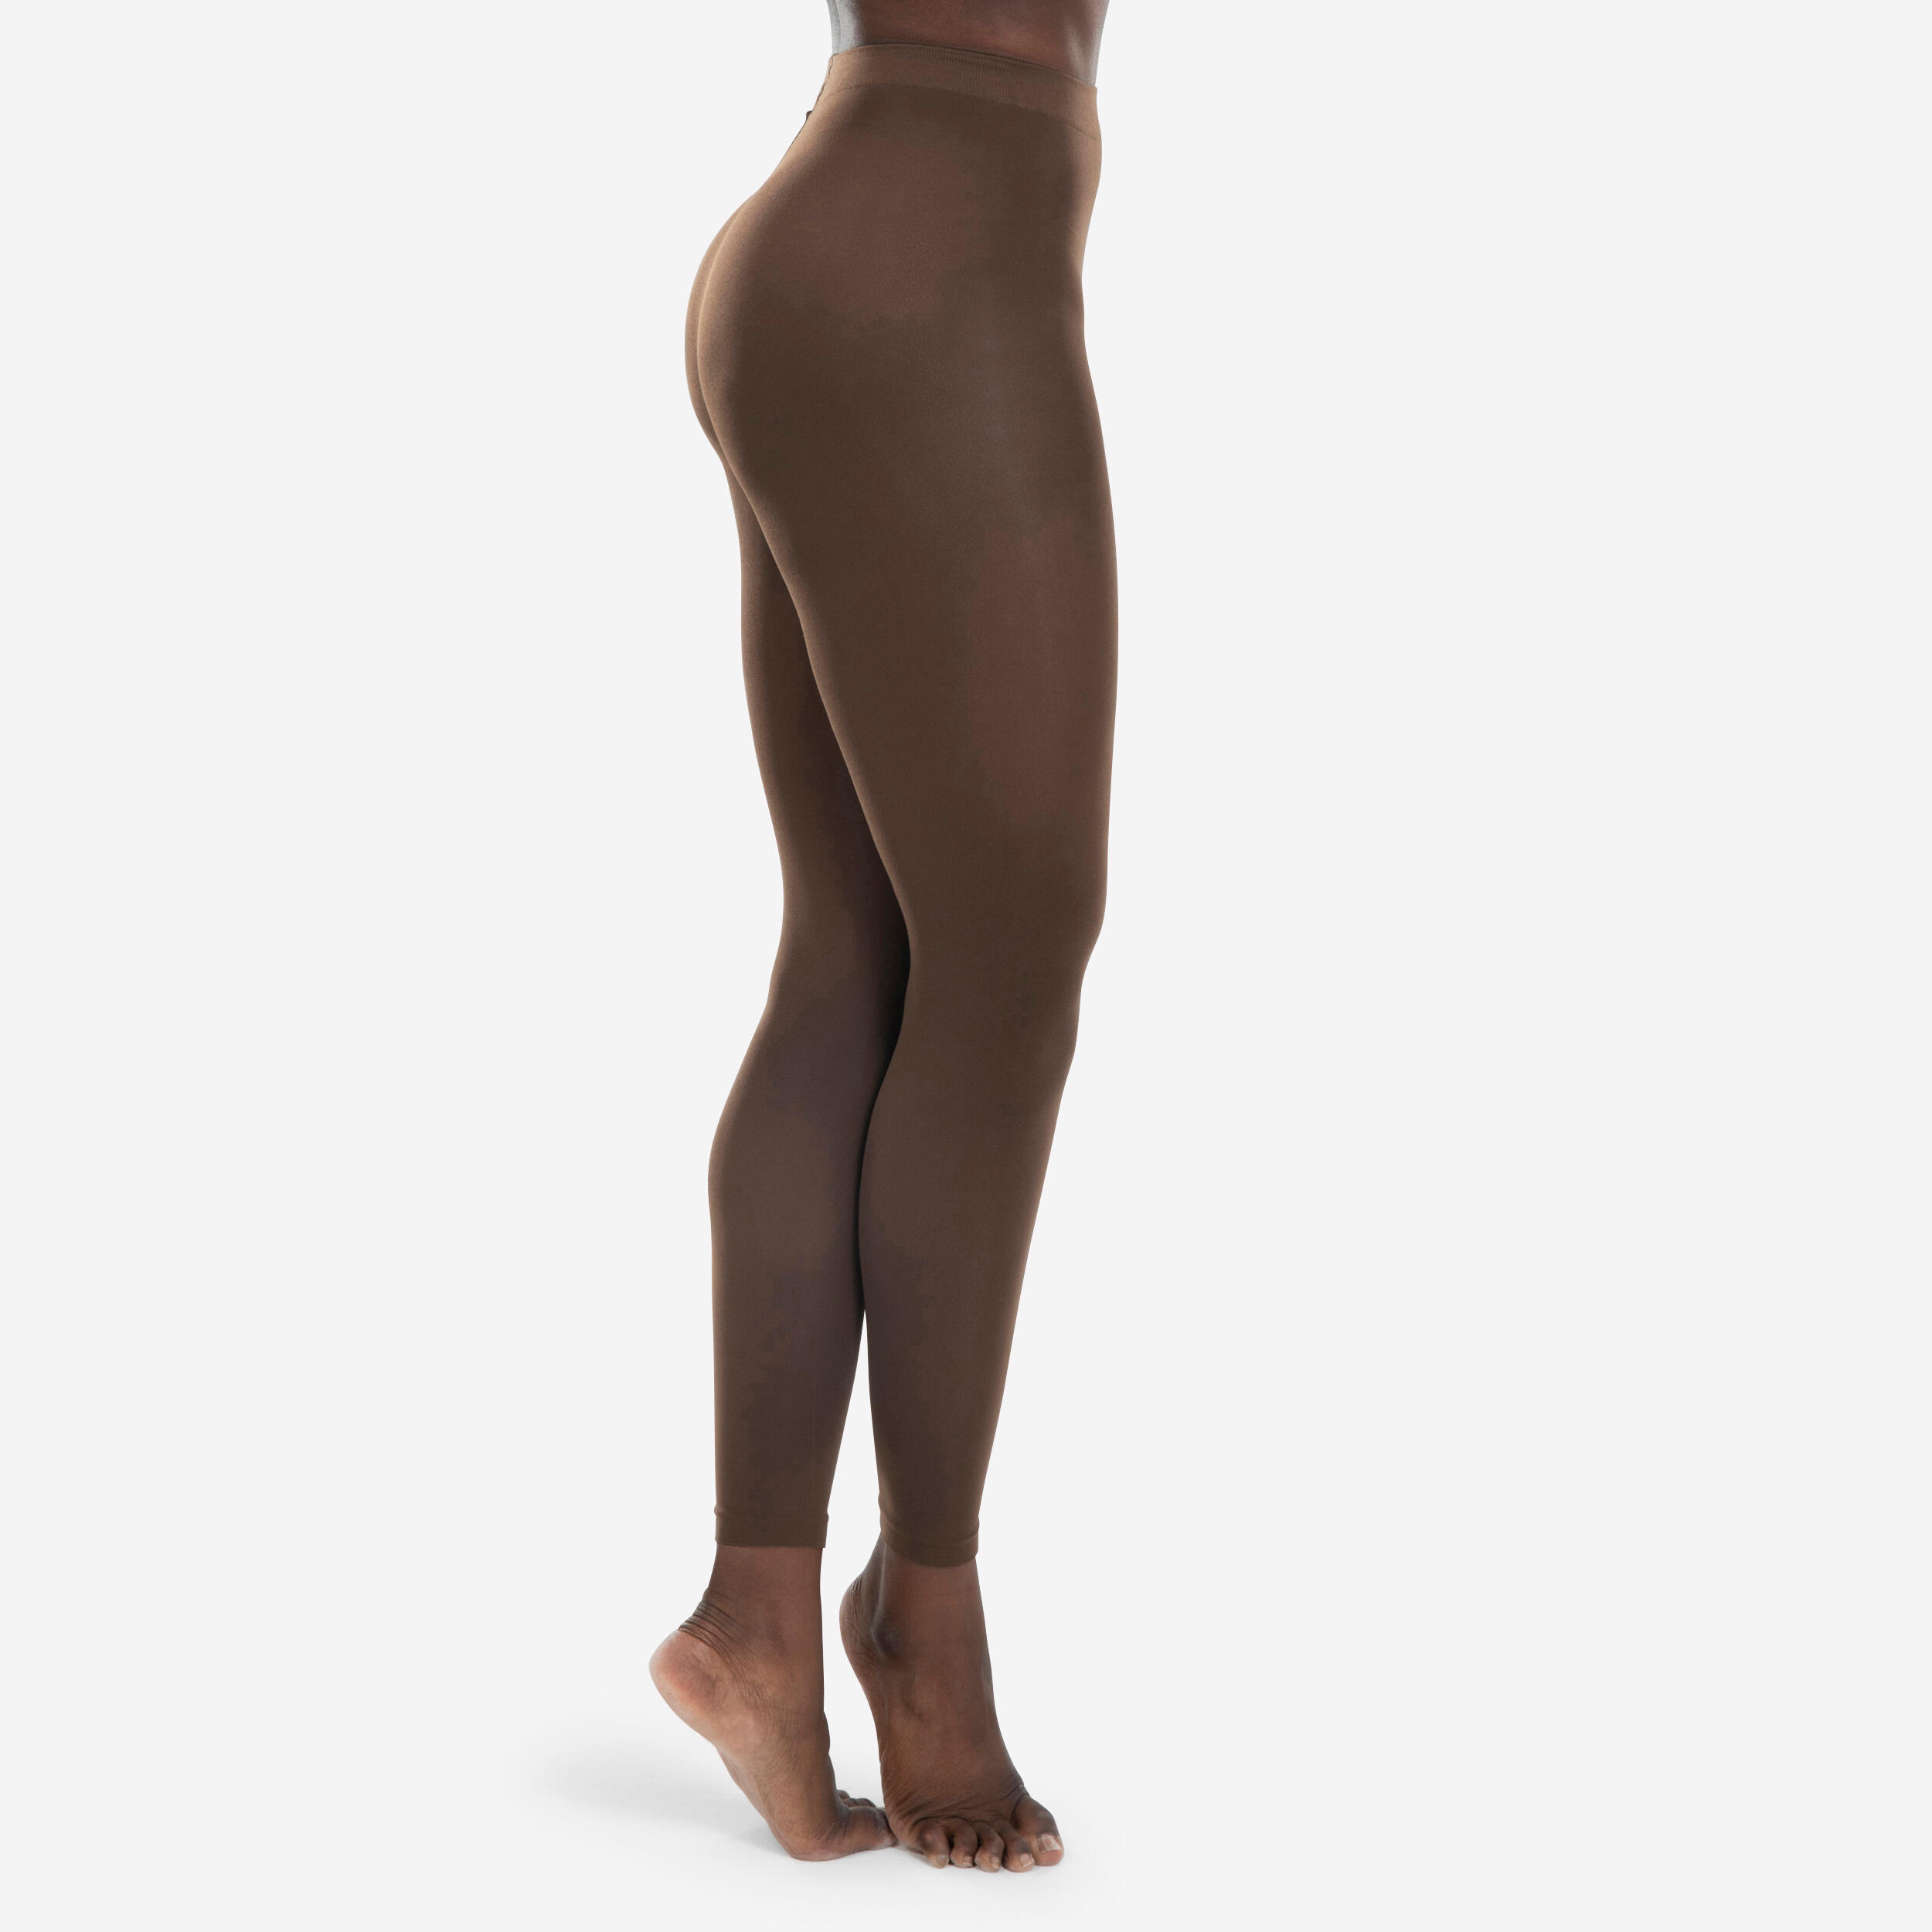 Women's Footless Ballet Tights - Chocolate 1/4